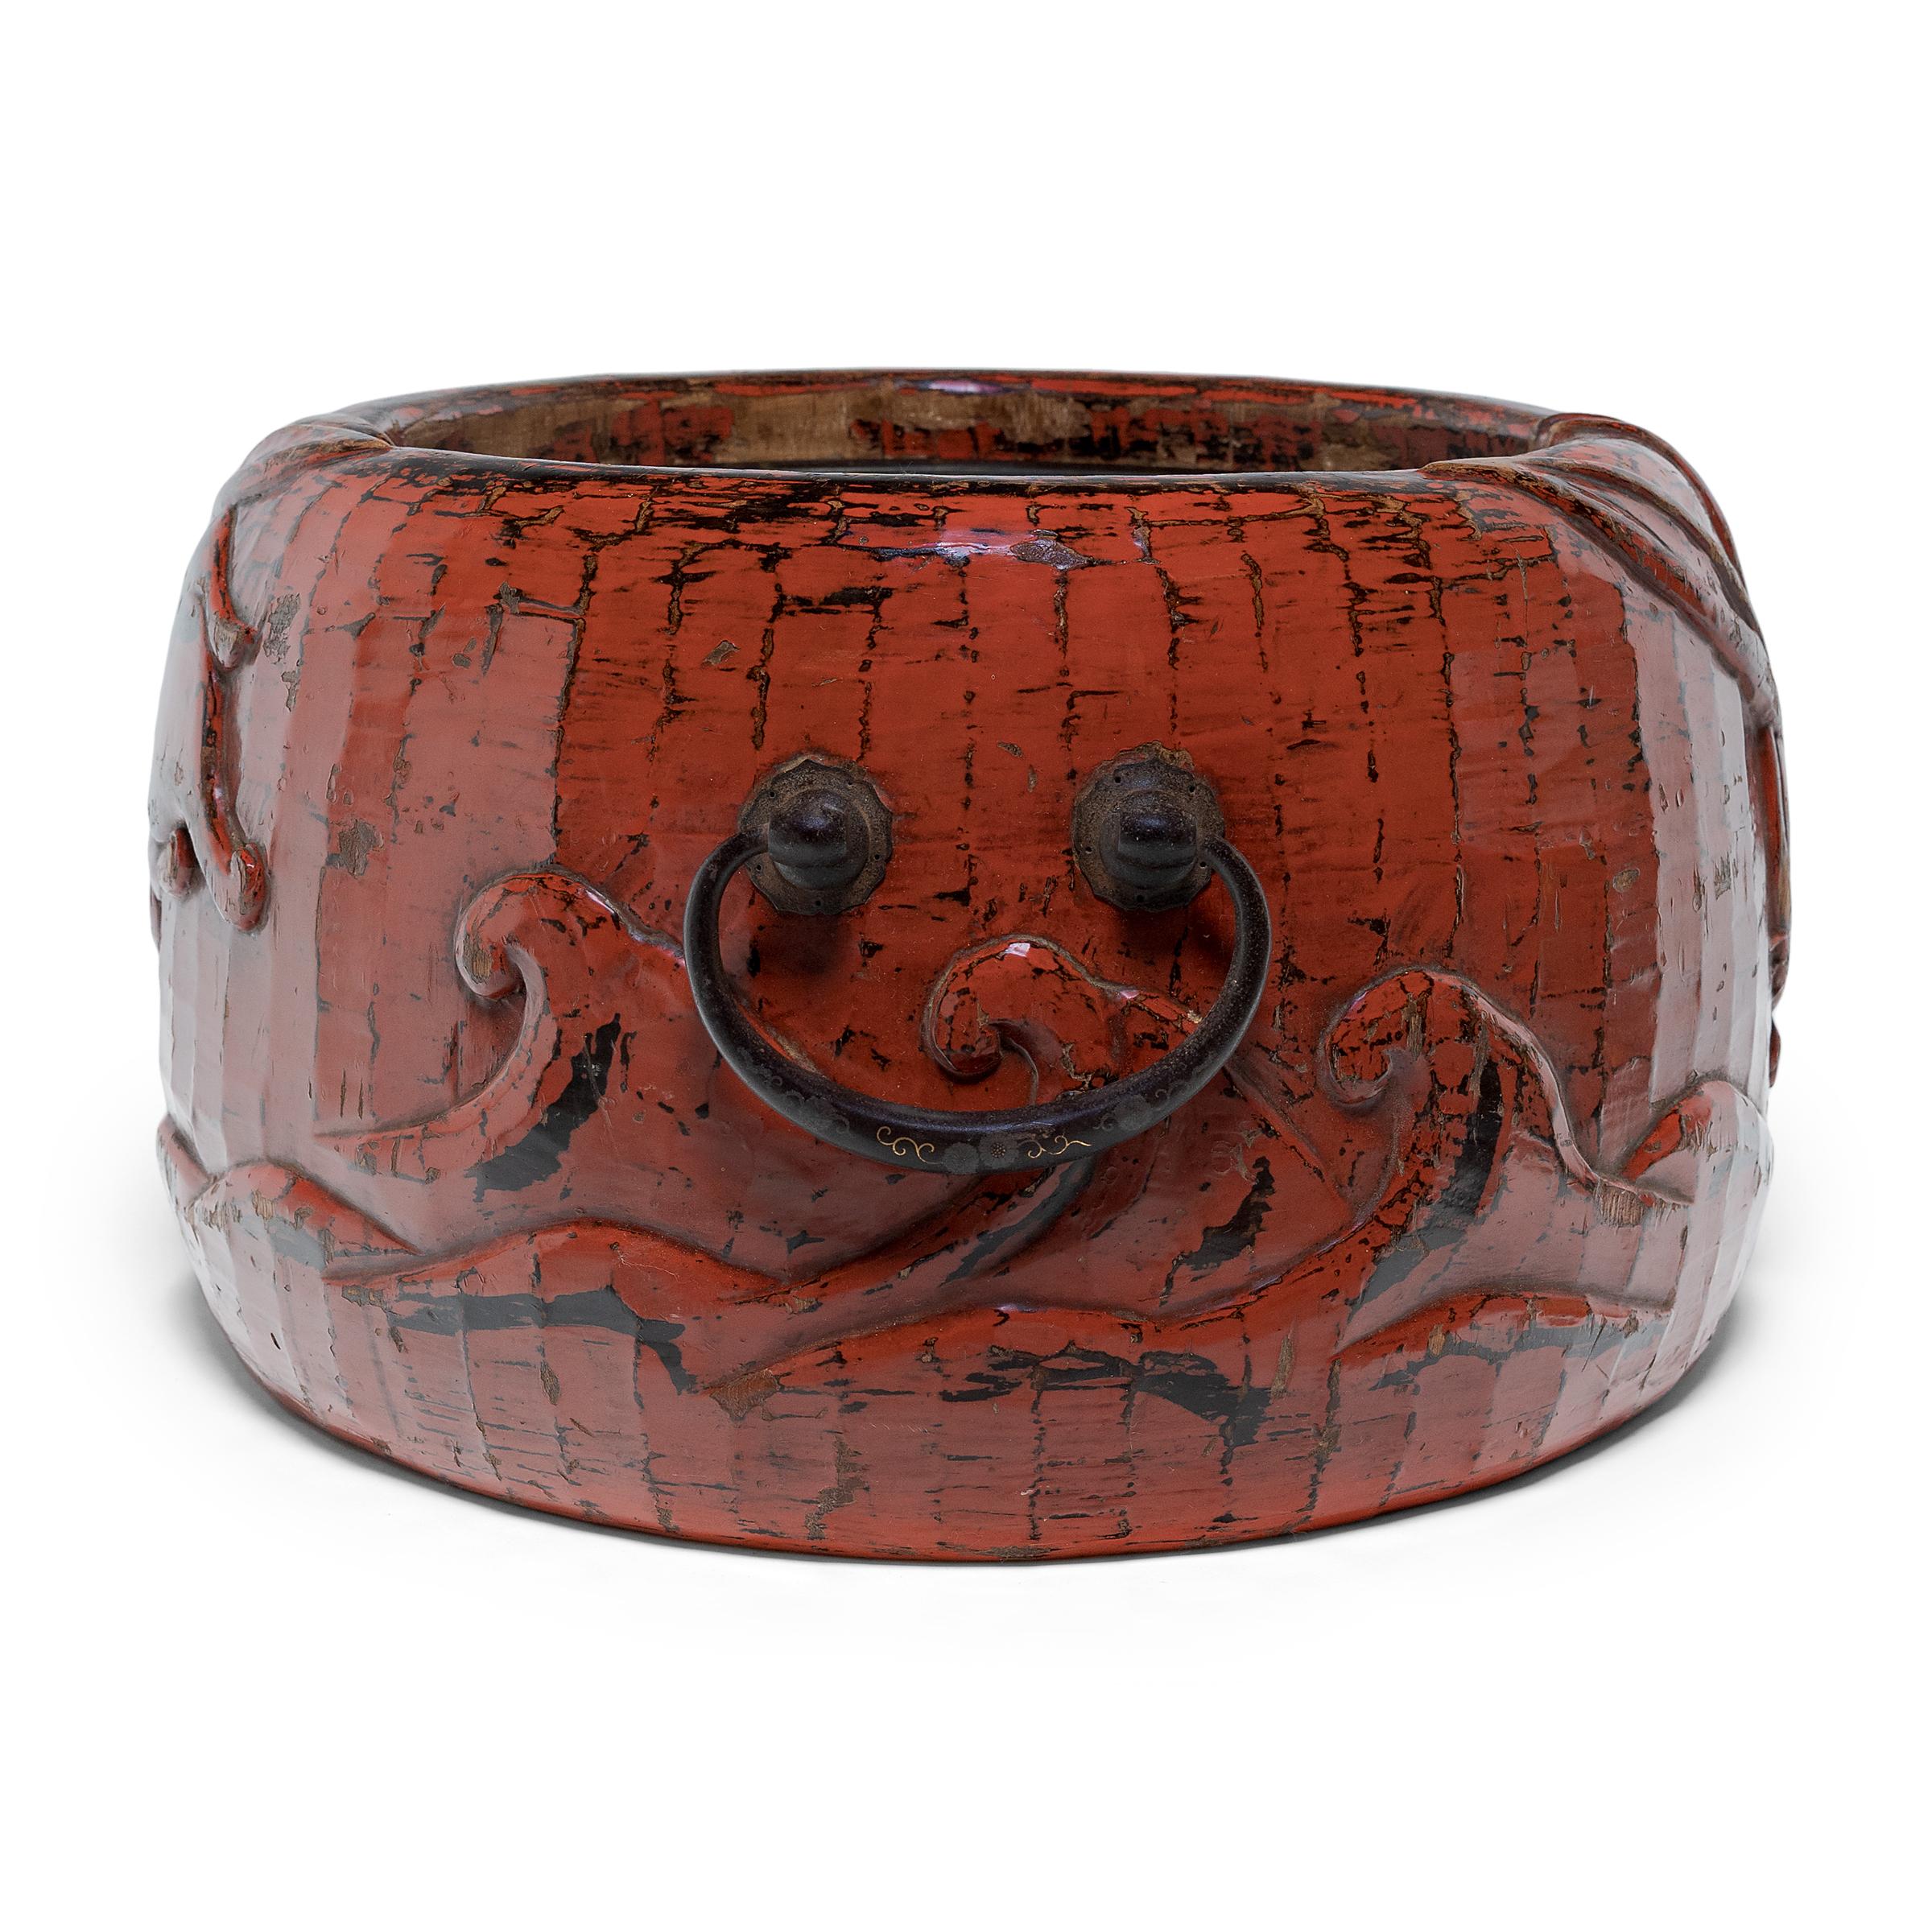 Japanese Red Lacquer Negoro Hibachi with Rabbits, Edo Period, c. 1850 In Good Condition For Sale In Chicago, IL